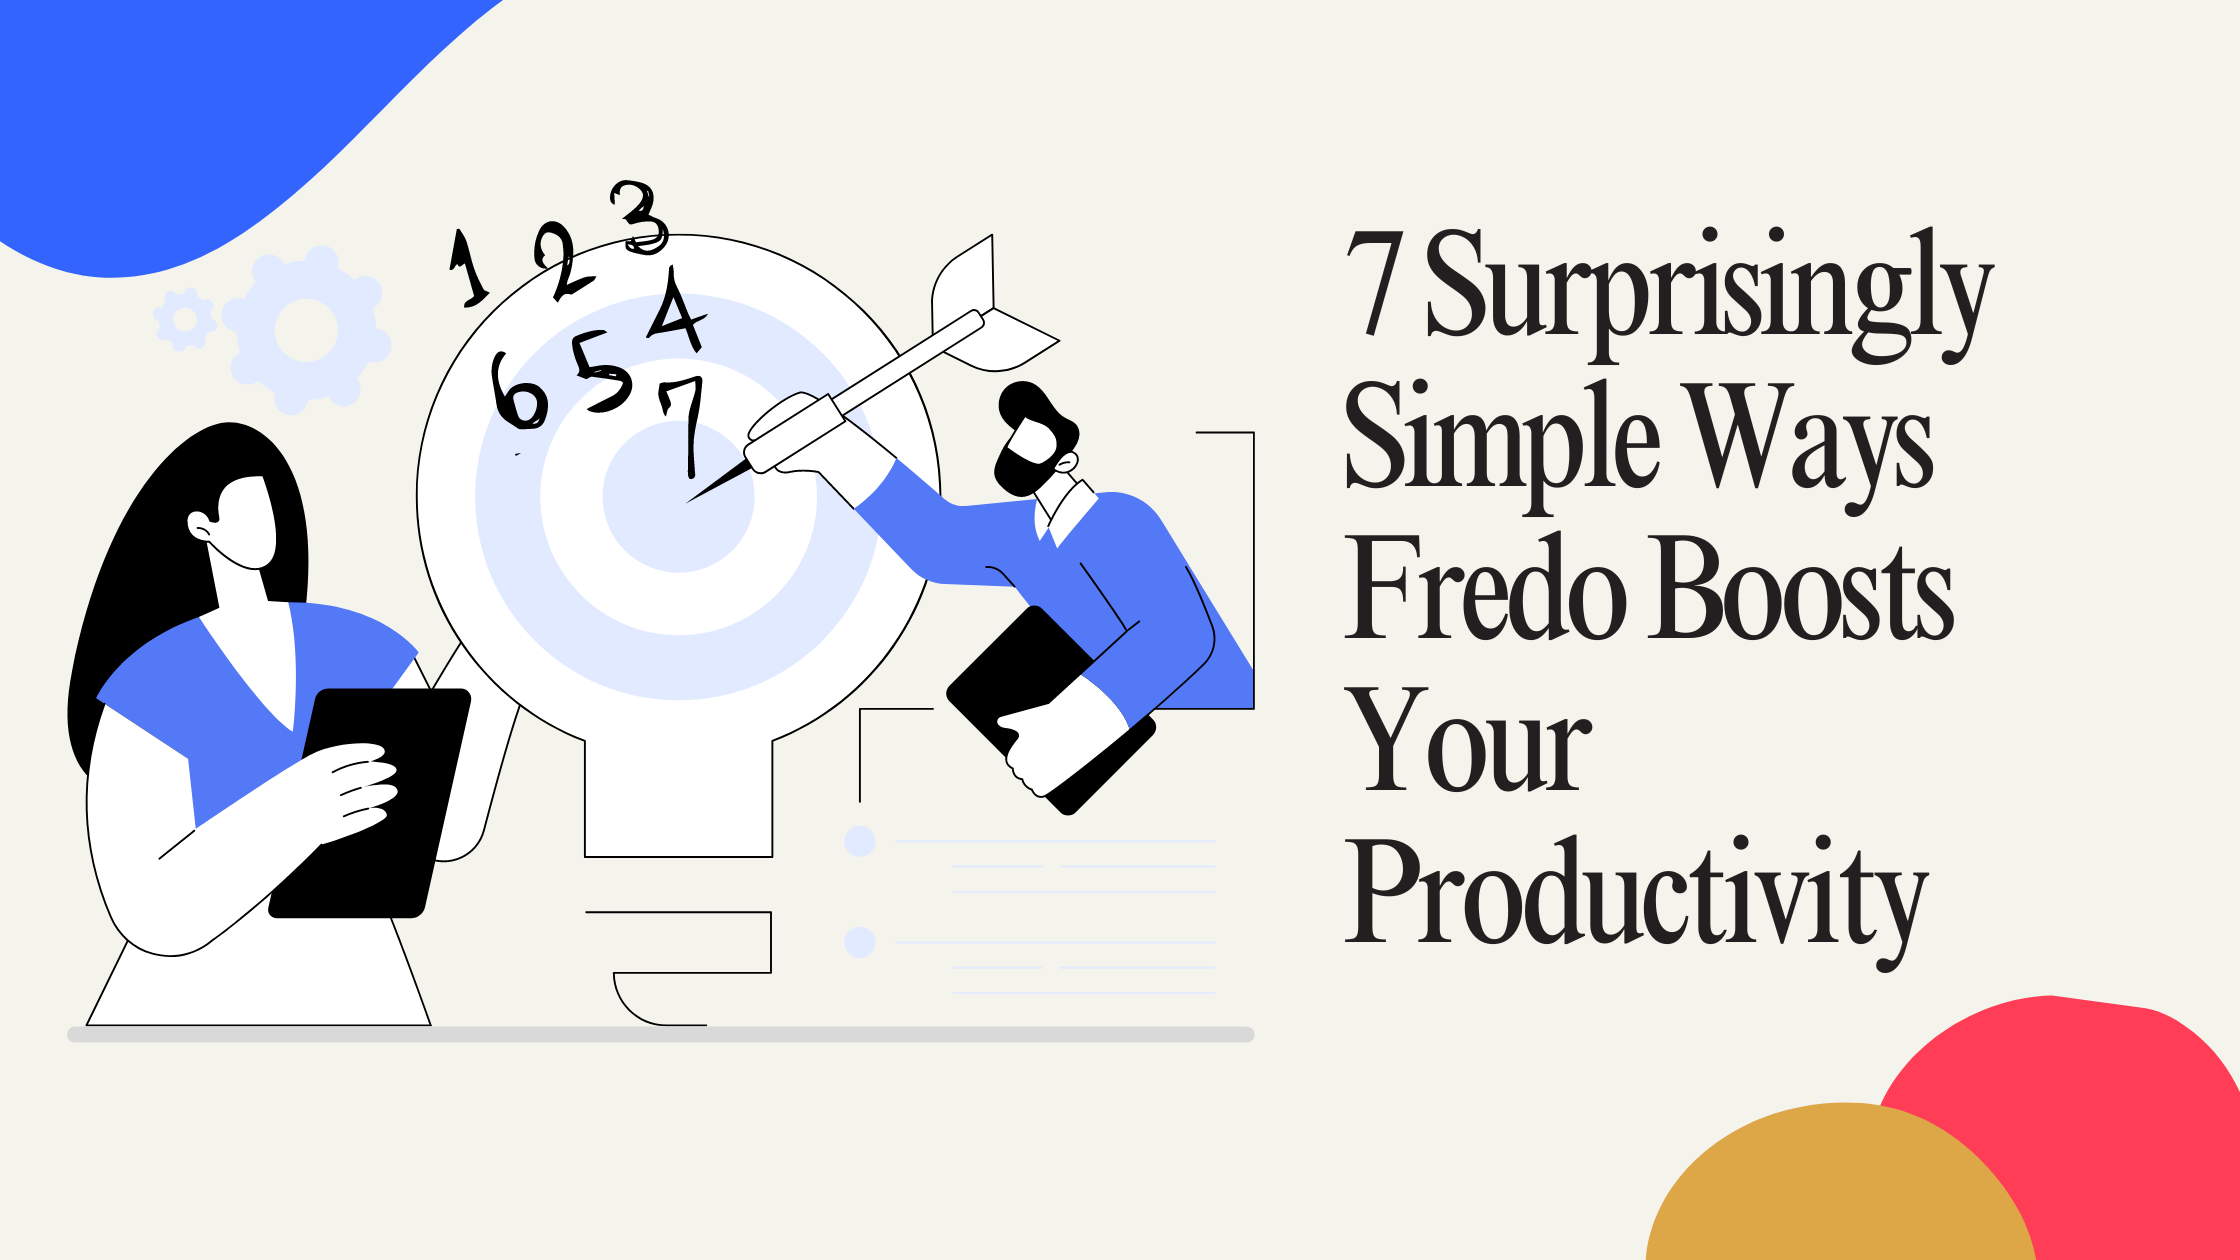 7 Surprisingly Simple Ways Fredo Boosts Your Productivity